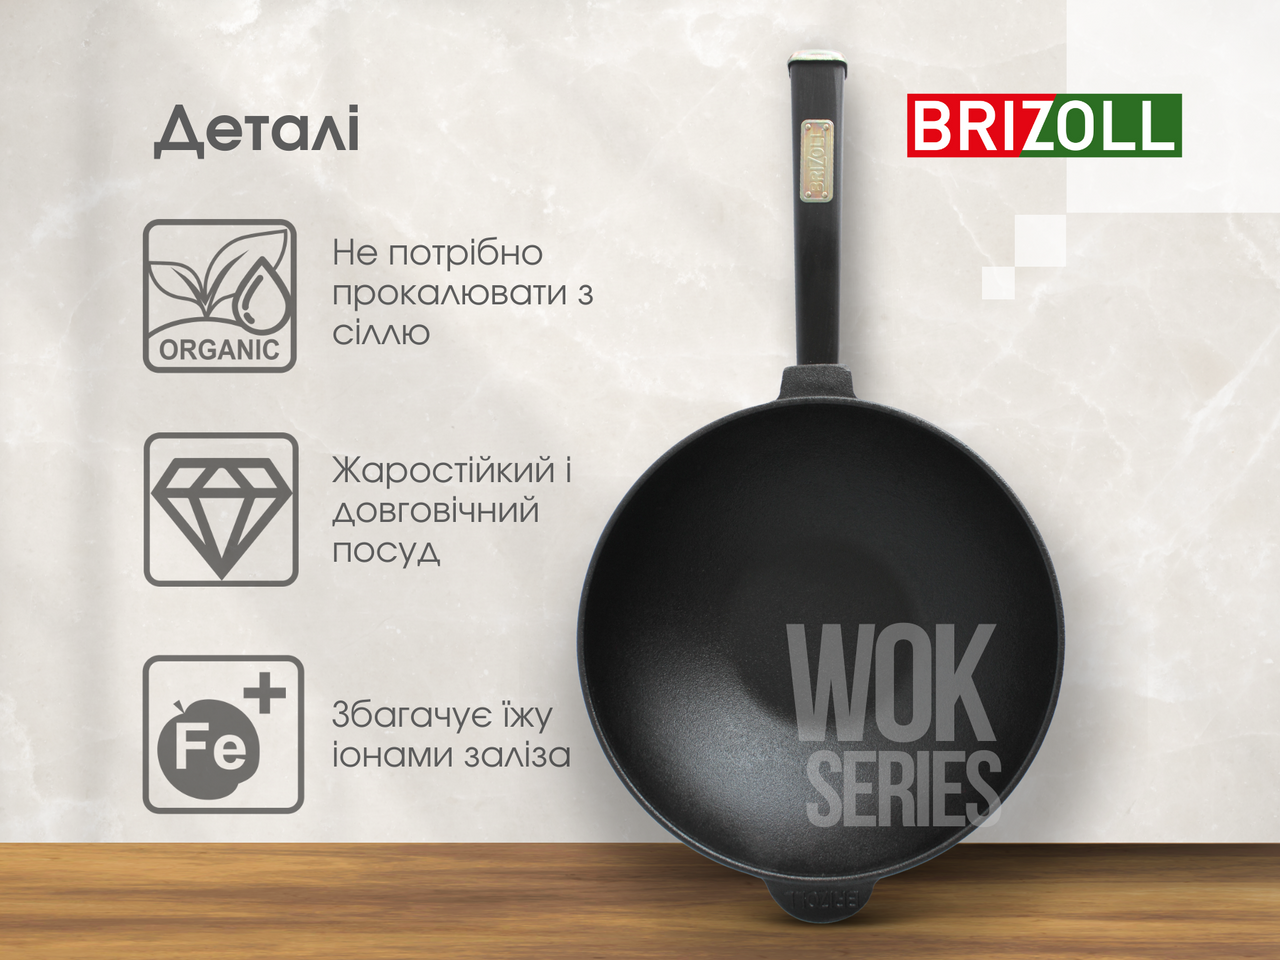 Cast iron WOK pan 2,8 l with wooden Black handle and glass lid